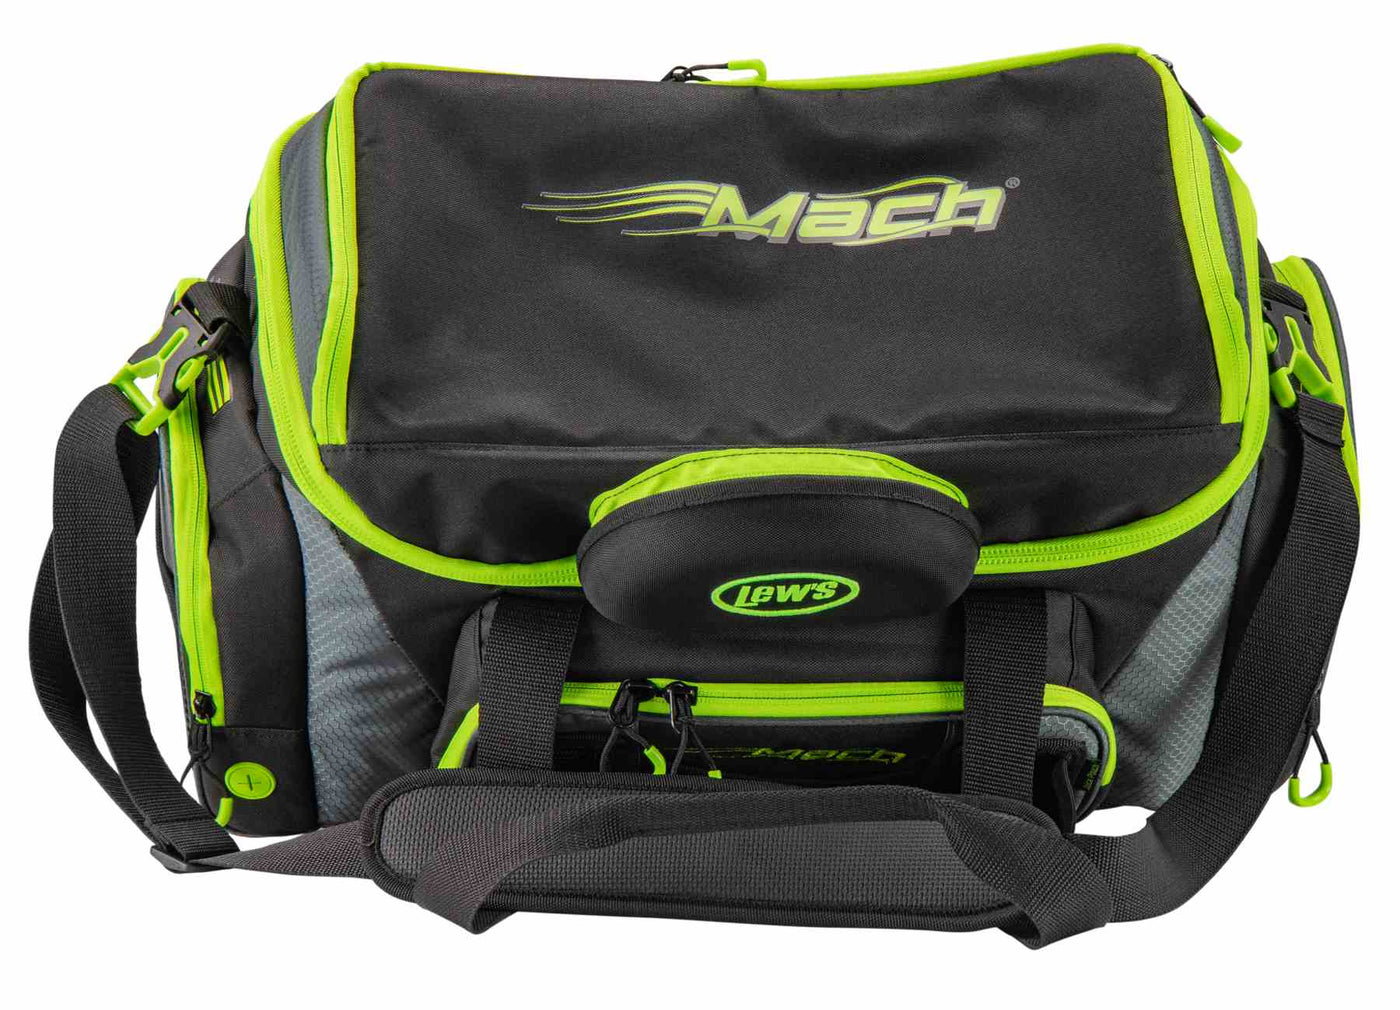 Lew's Mach fishing tackle bag with multiple compartments in green and black